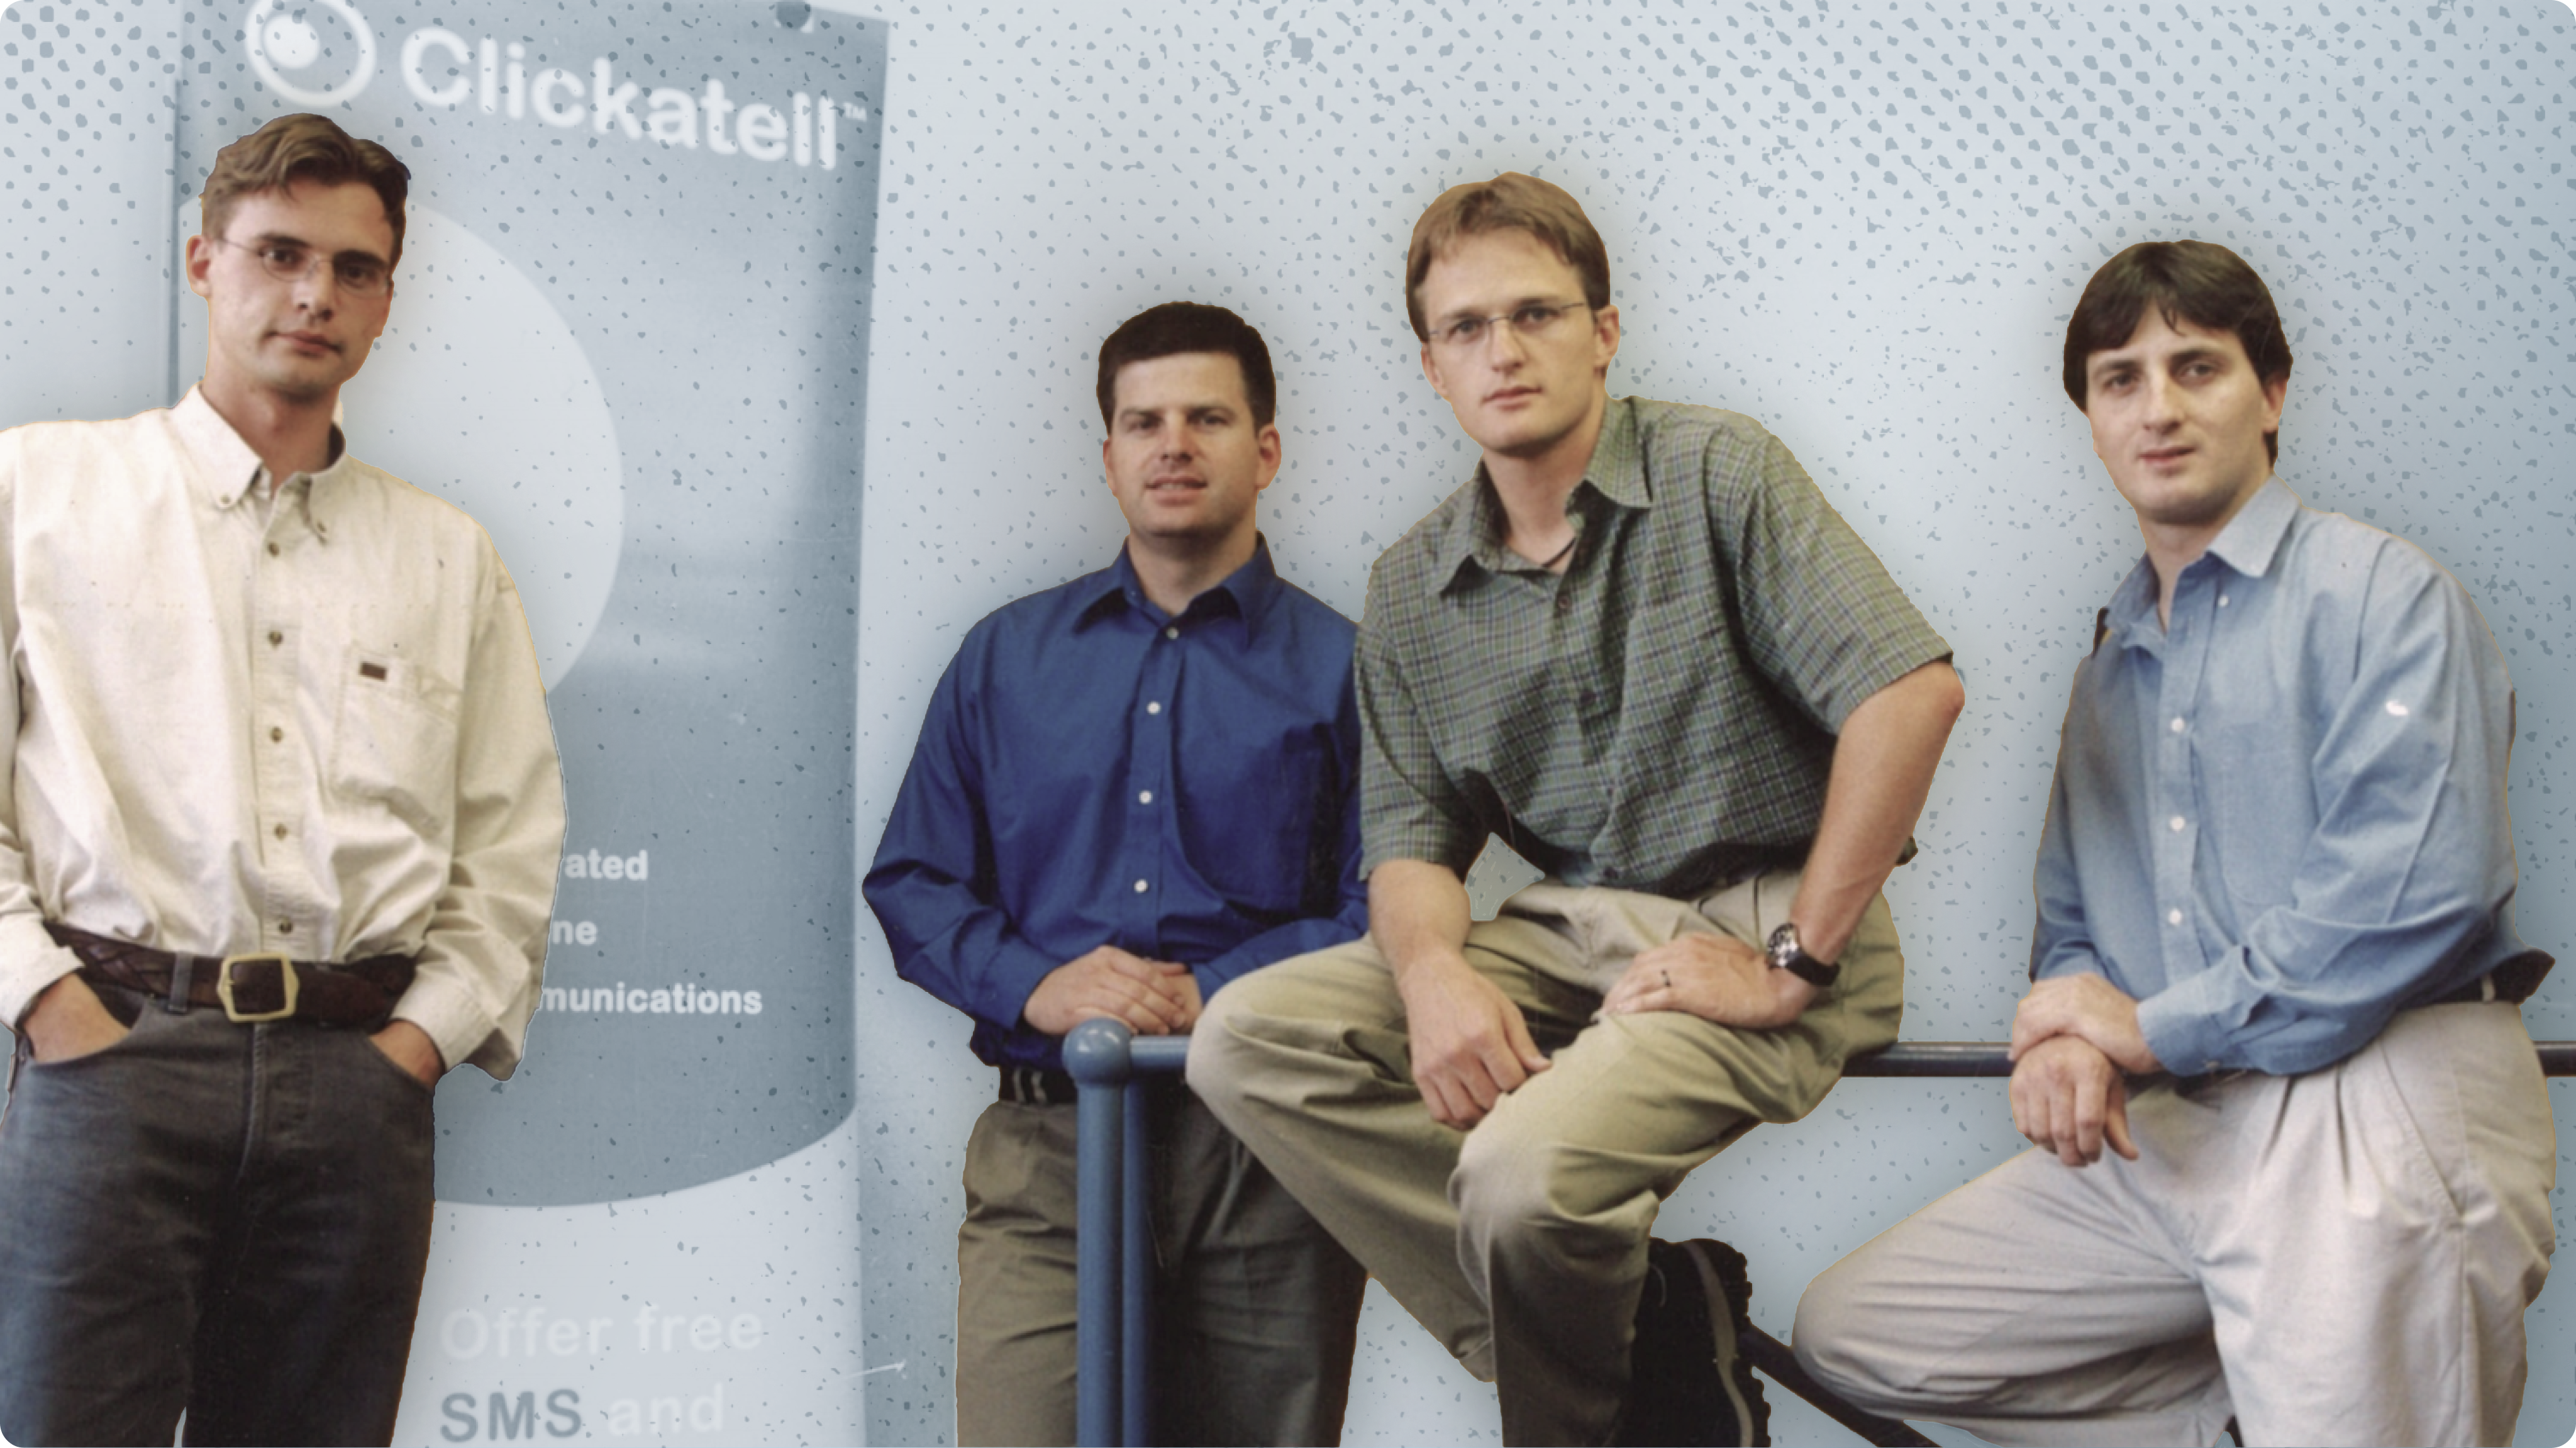 Clickatell Founders